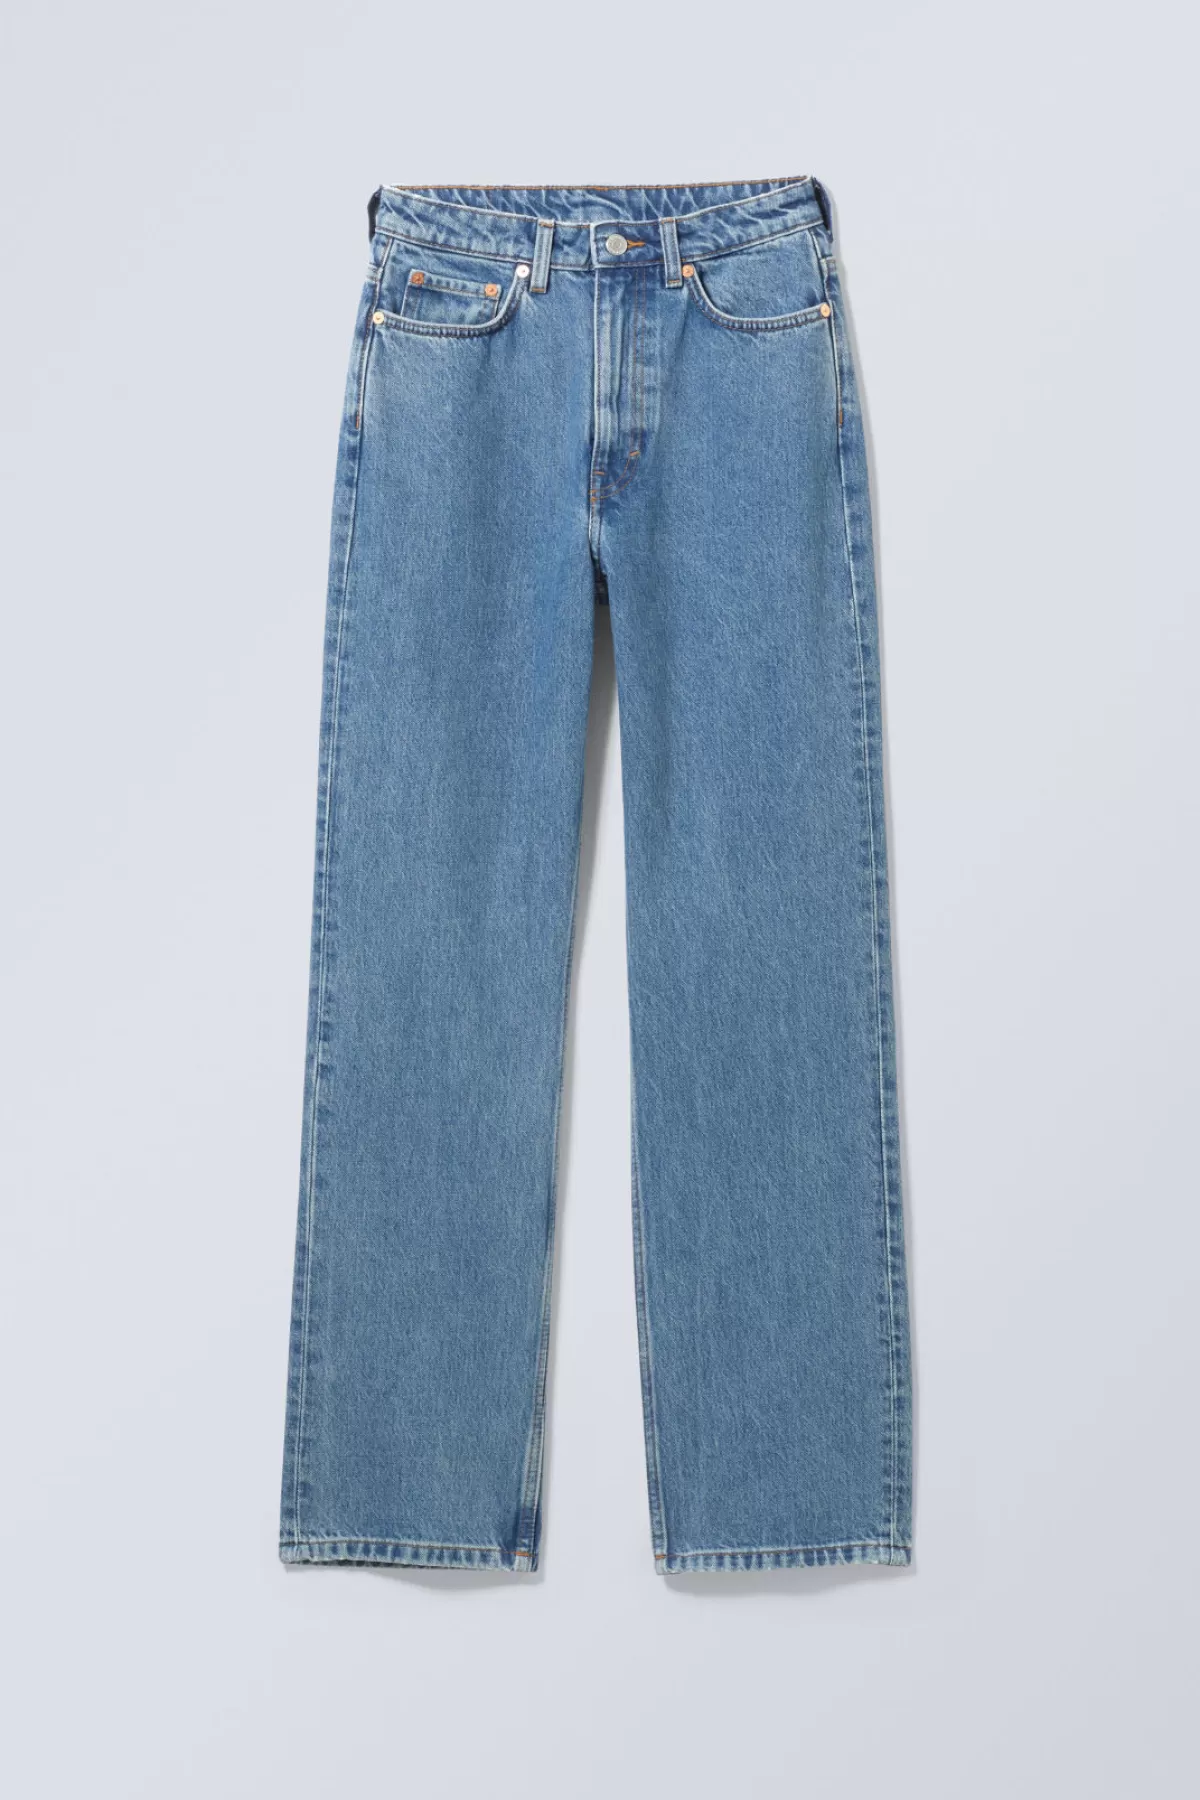 Weekday Rowe Extra High Straight Jeans 90s Blue Hot